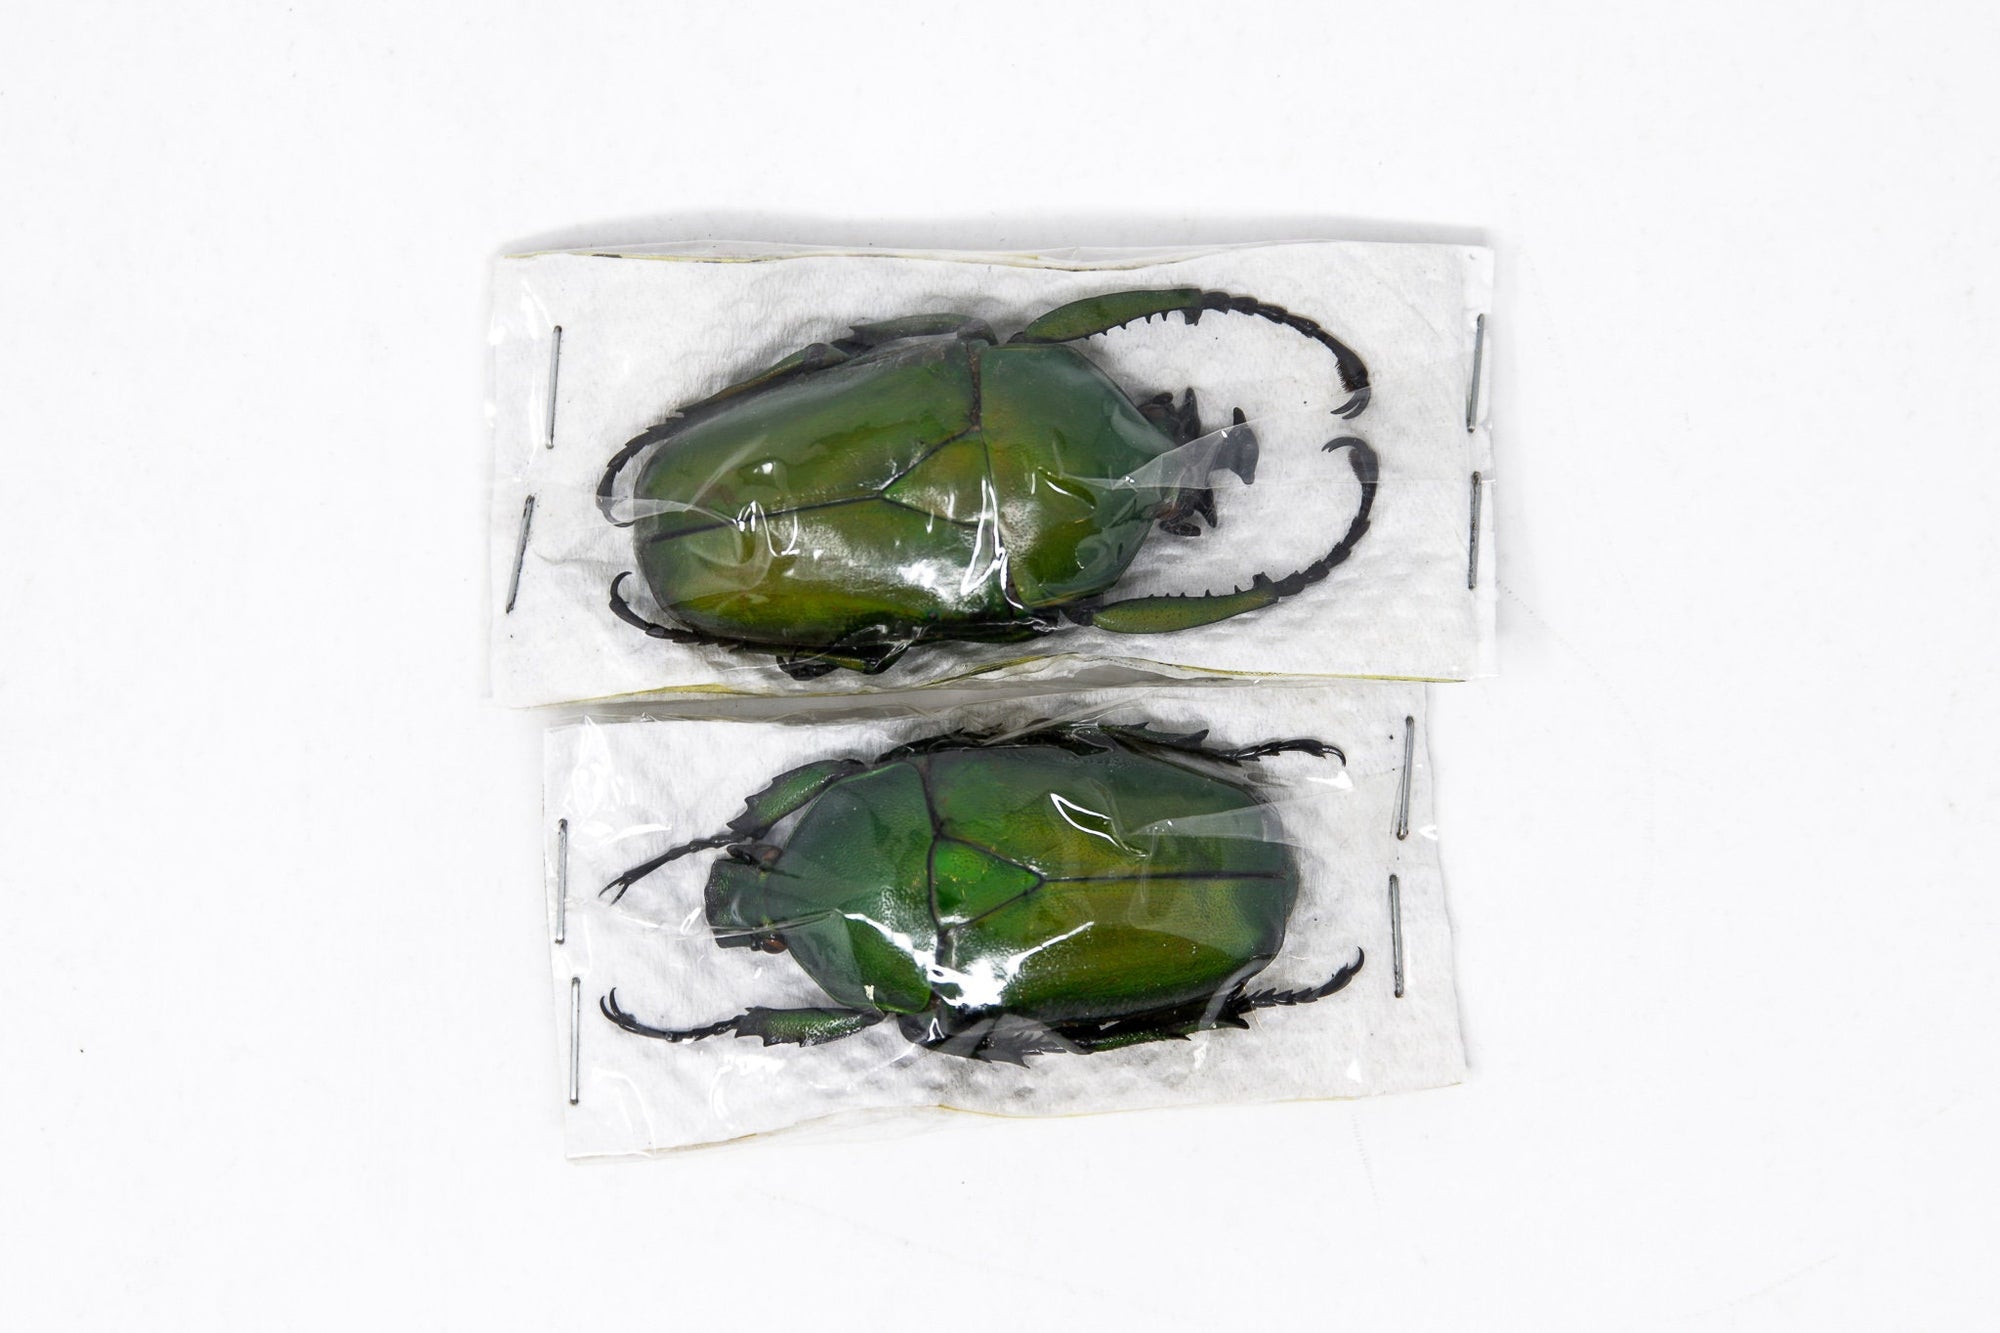 Two (2) Dicranorrhina mican mican, Unmounted Beetle Specimens with Scientific Collection Data, A1 Quality